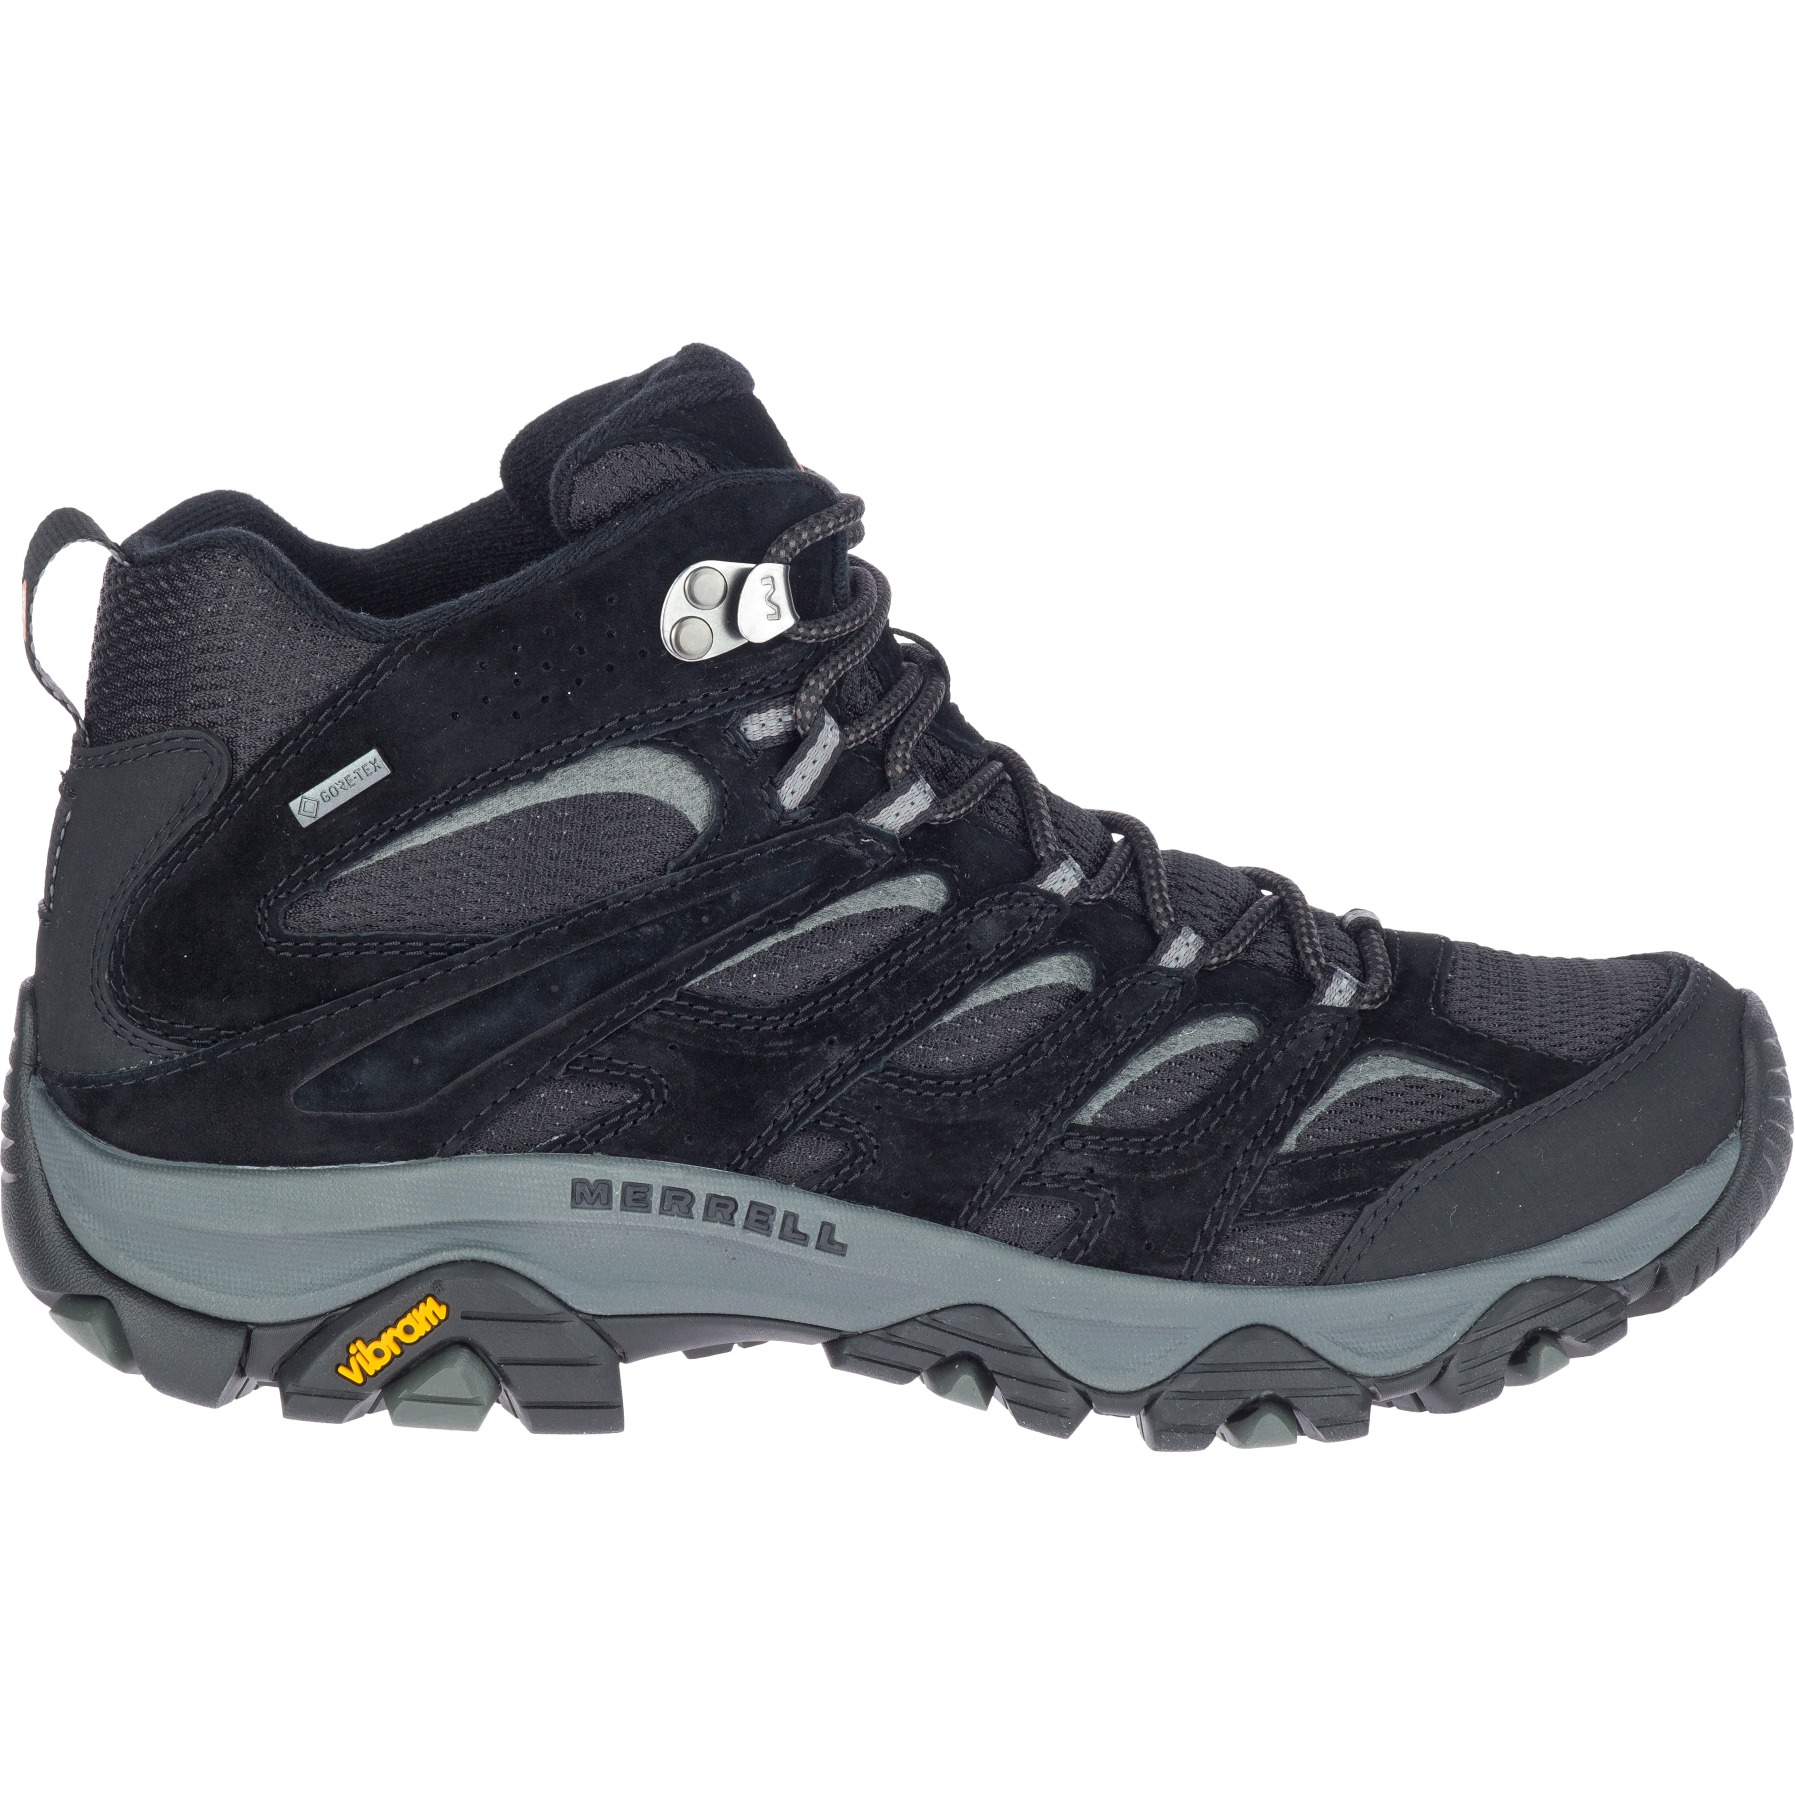 Picture of Merrell Moab 3 Mid GORE-TEX Hiking Shoes Men - black/grey